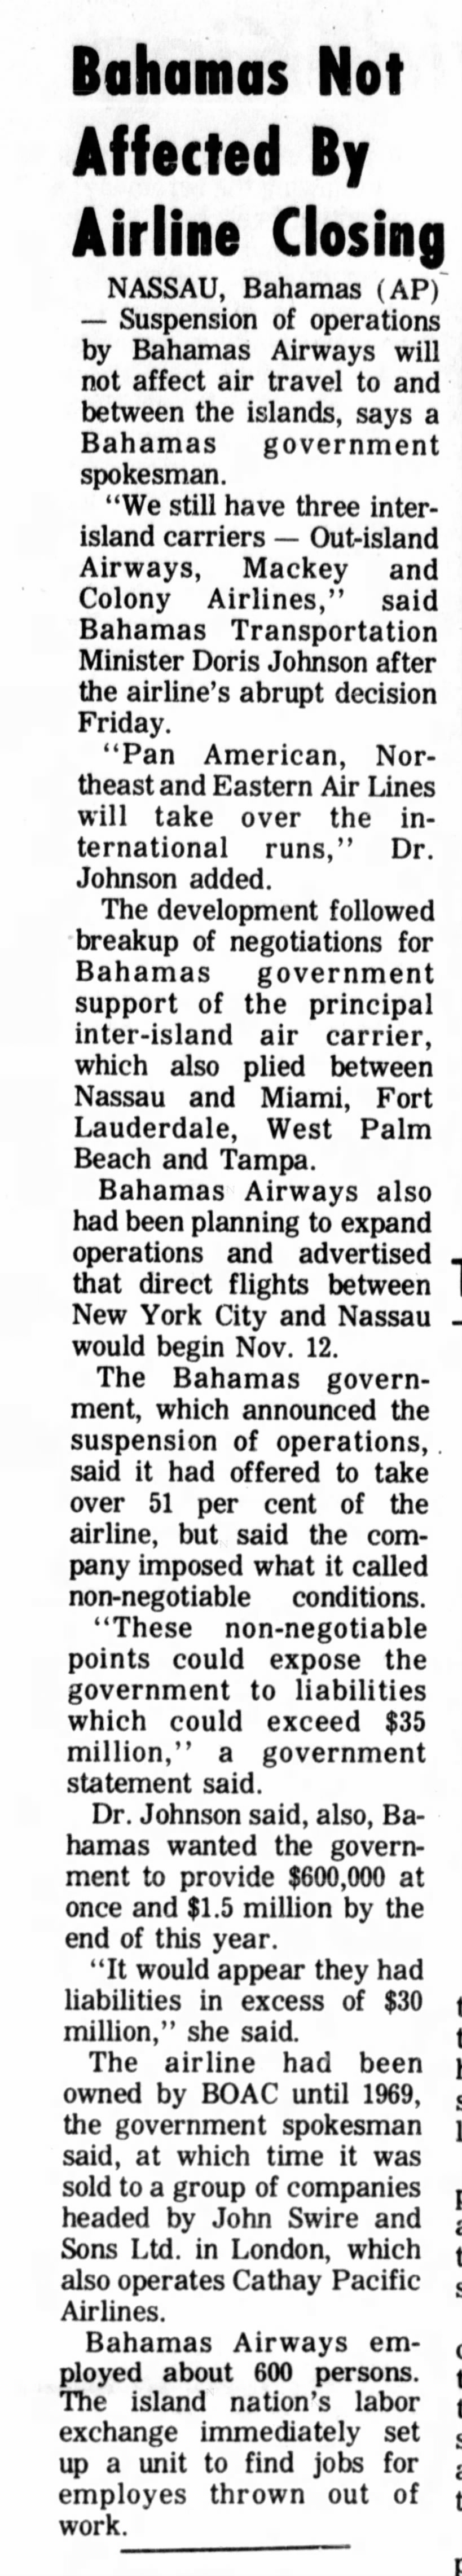 Bahamas Not Affected by Airline Closing (The Naples Daily News) Naples, Florida 12 October 1970 p 5